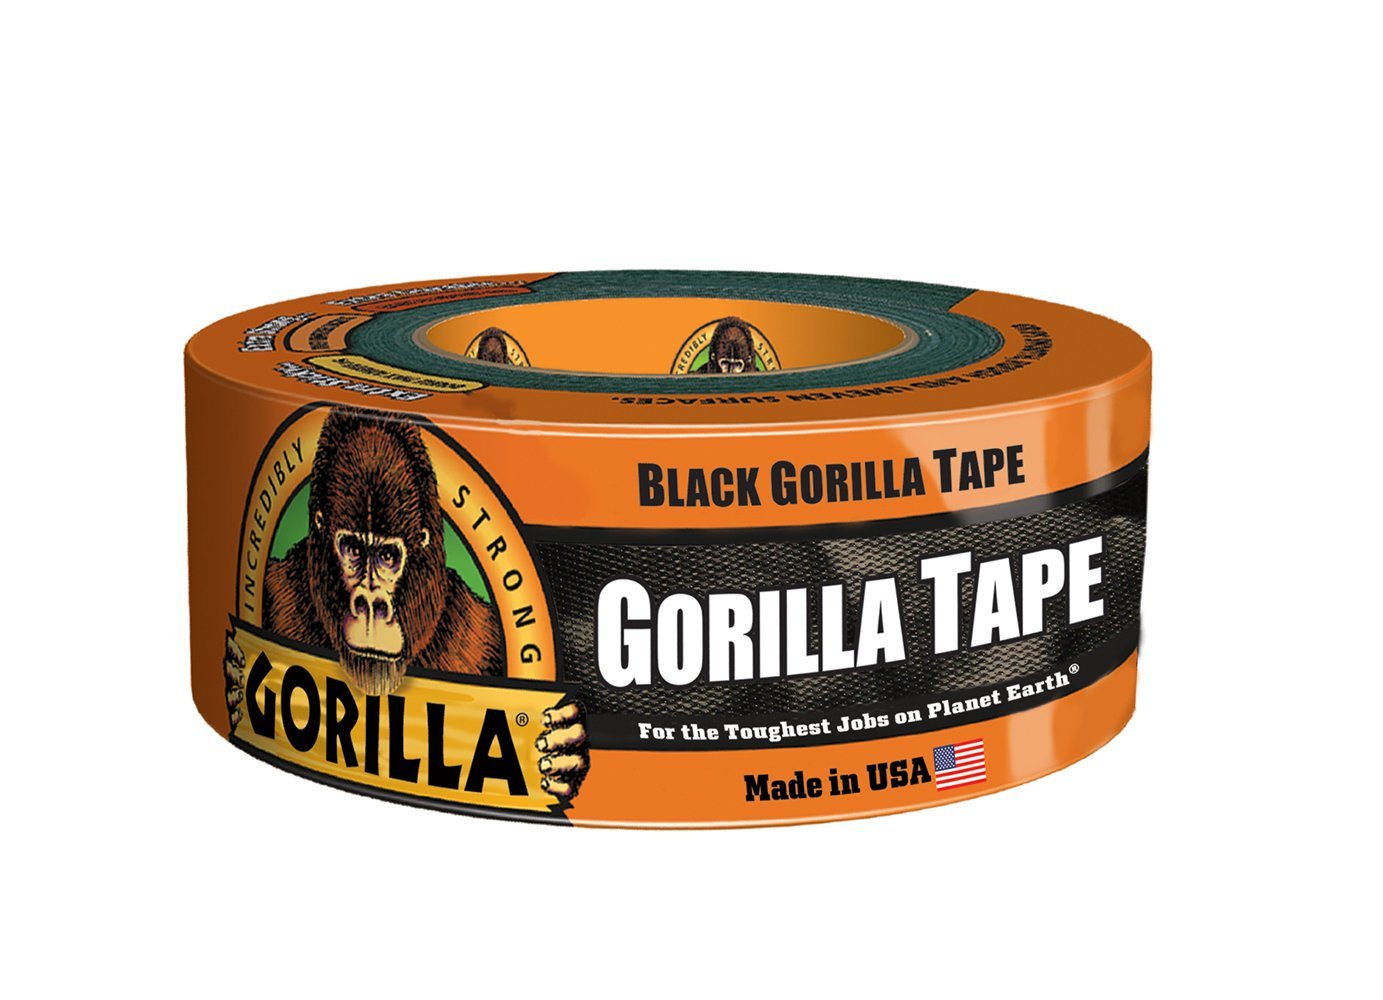 GORILLA TAPE DOUBLE THICK BLACK 1.8"W 12 yds